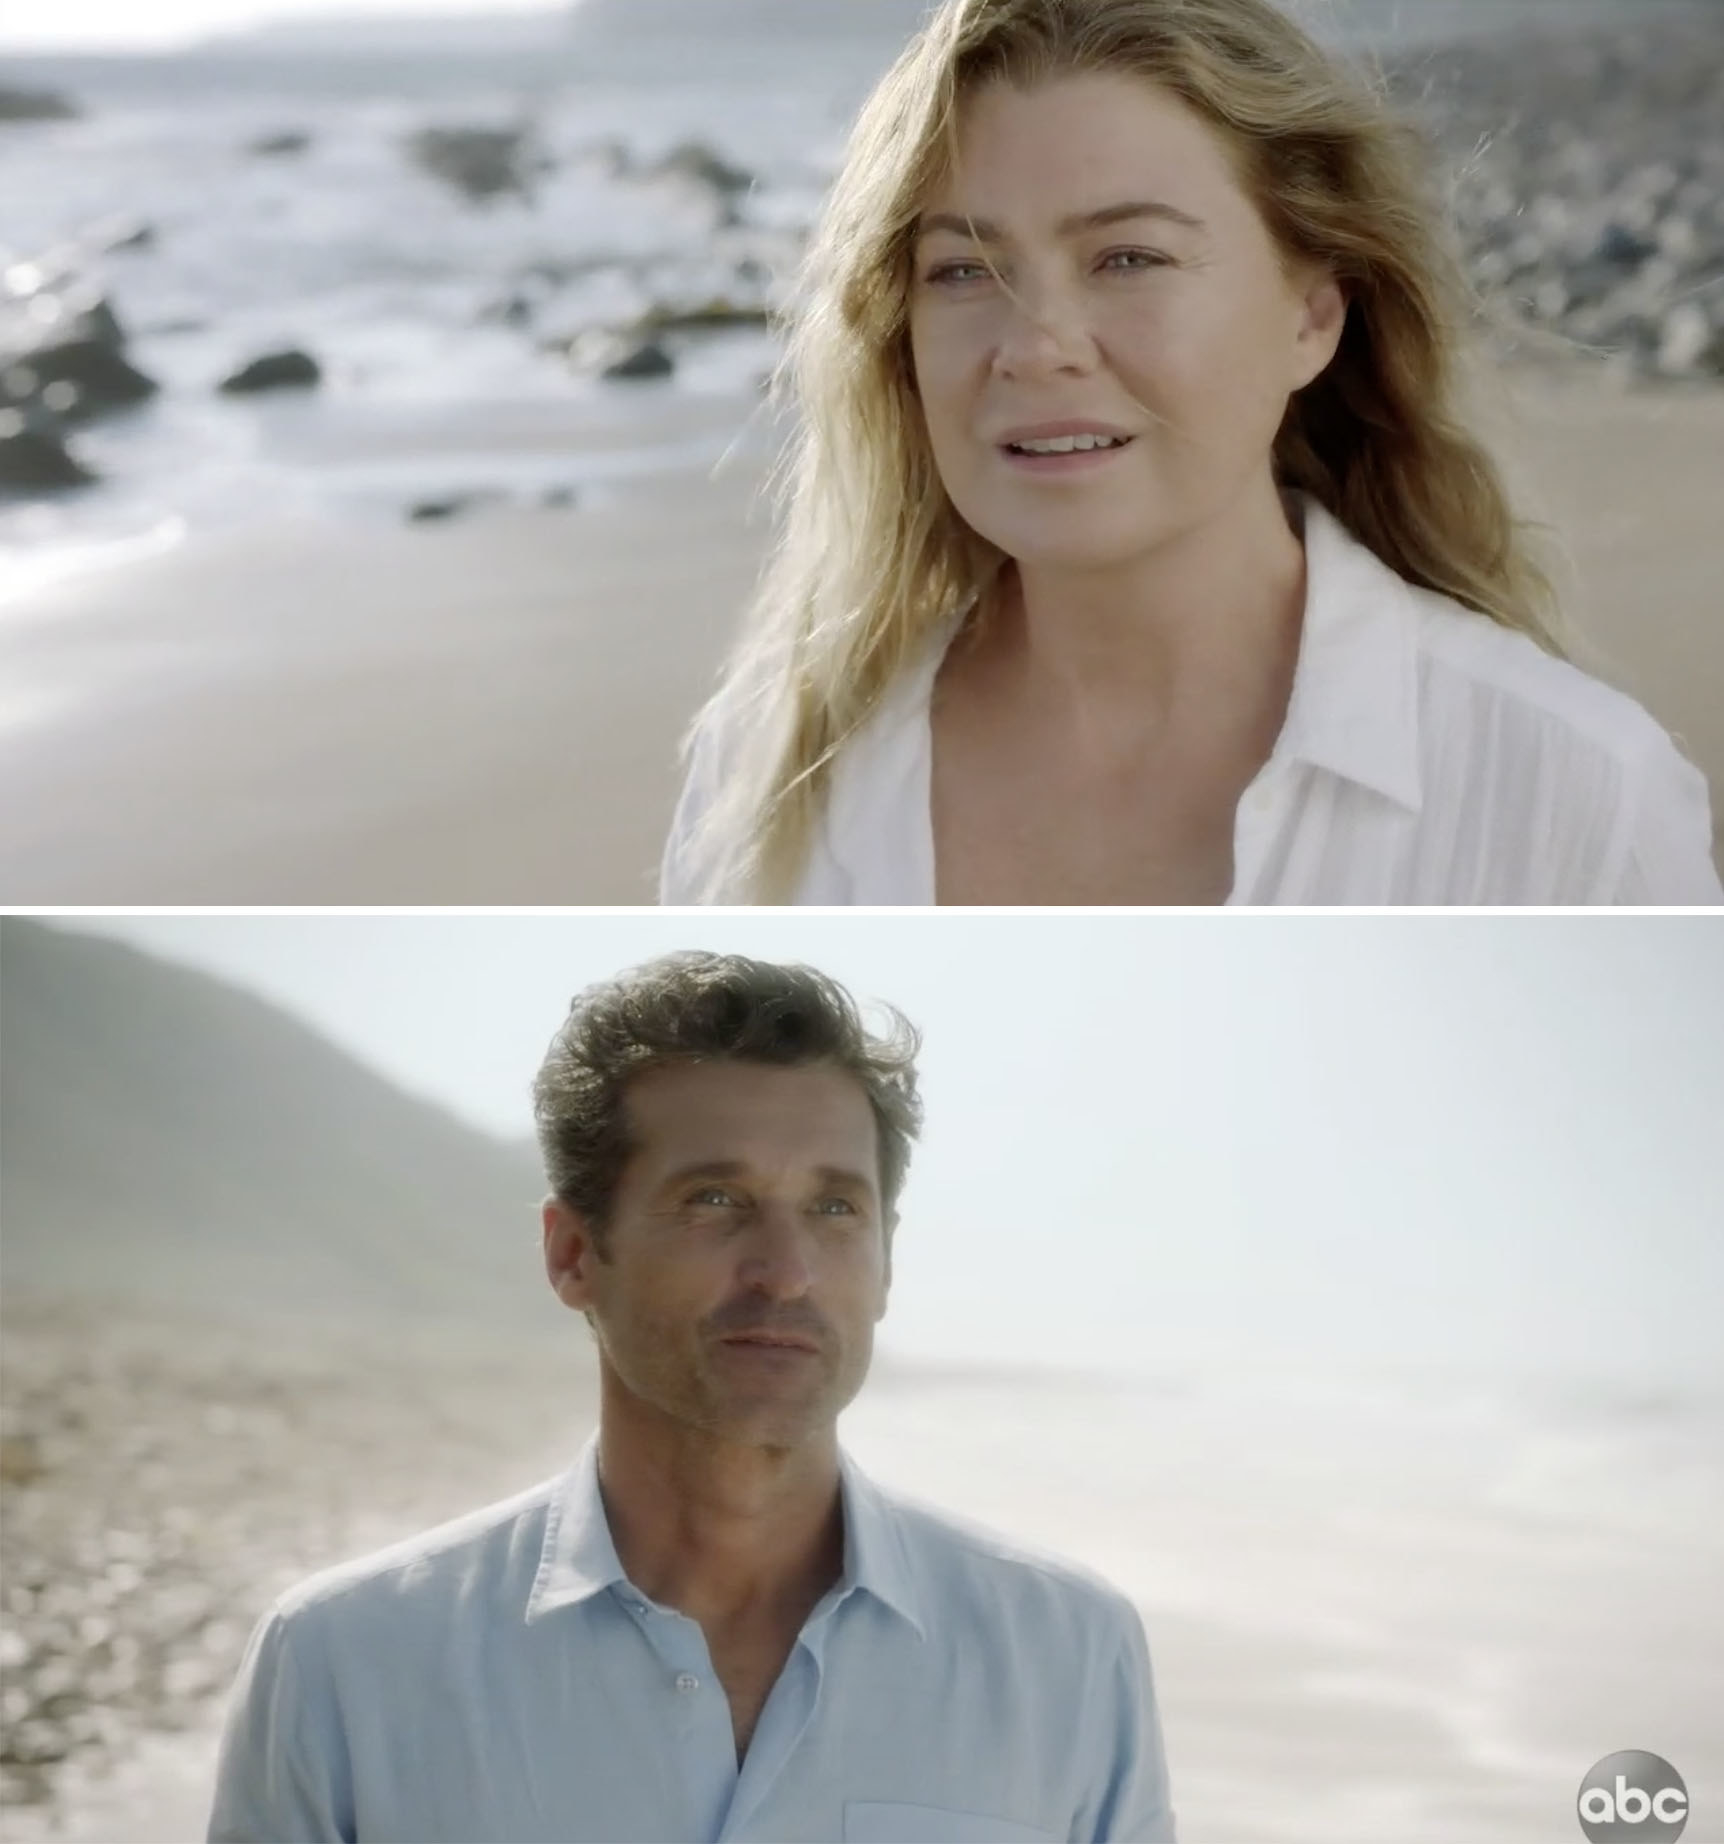 Derek and Meredith looking at each other on the beach